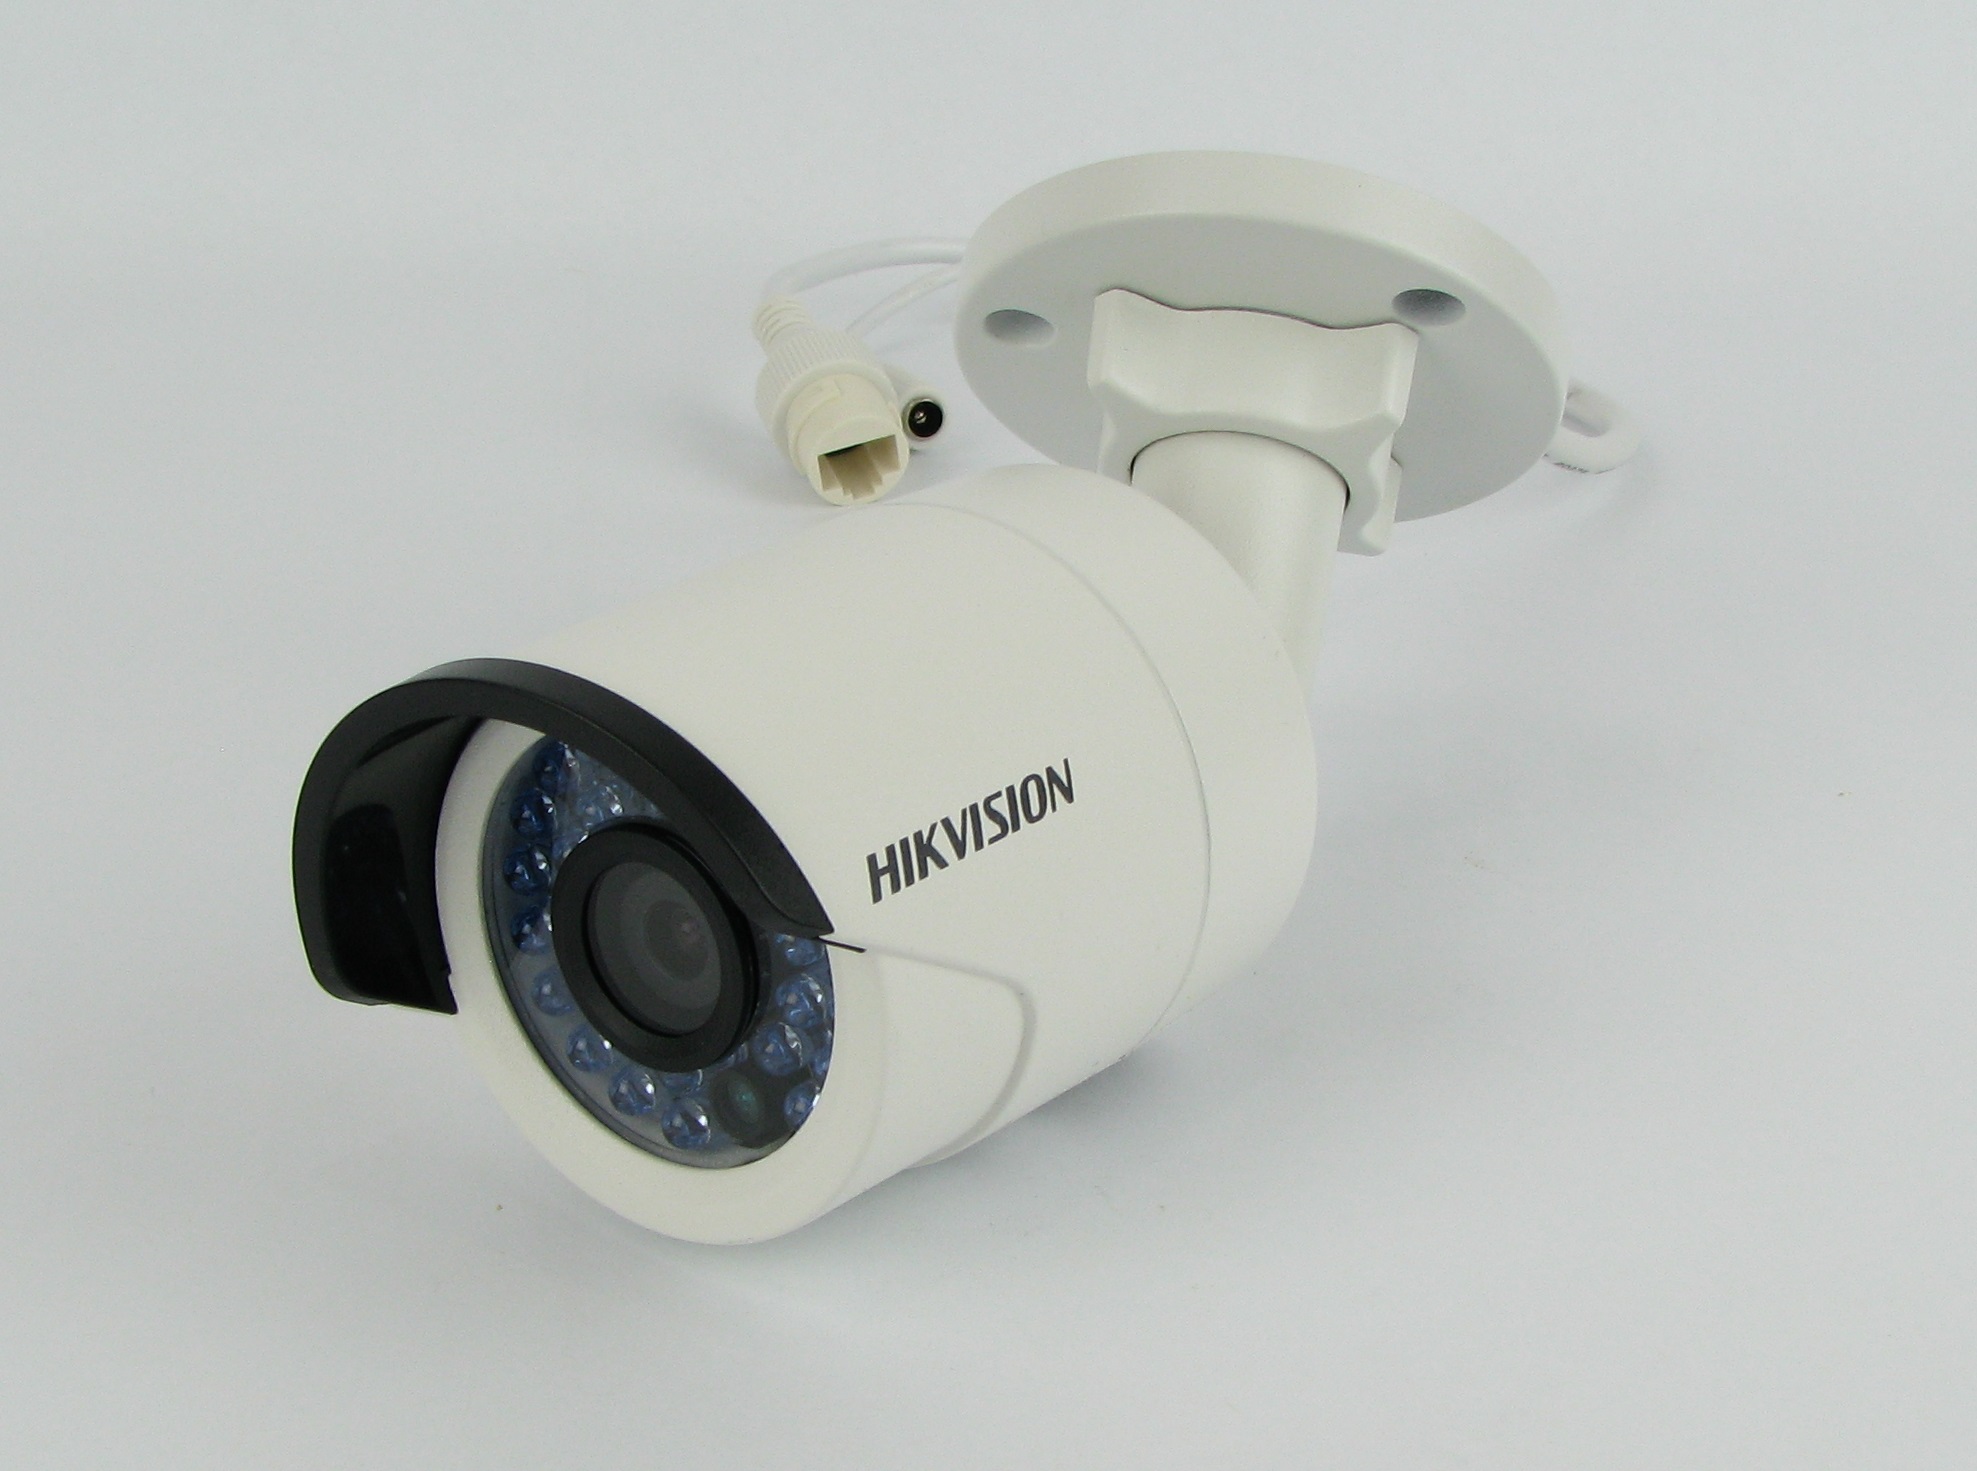 Hikvision DS-2CD2042WD-I Camera Front Right